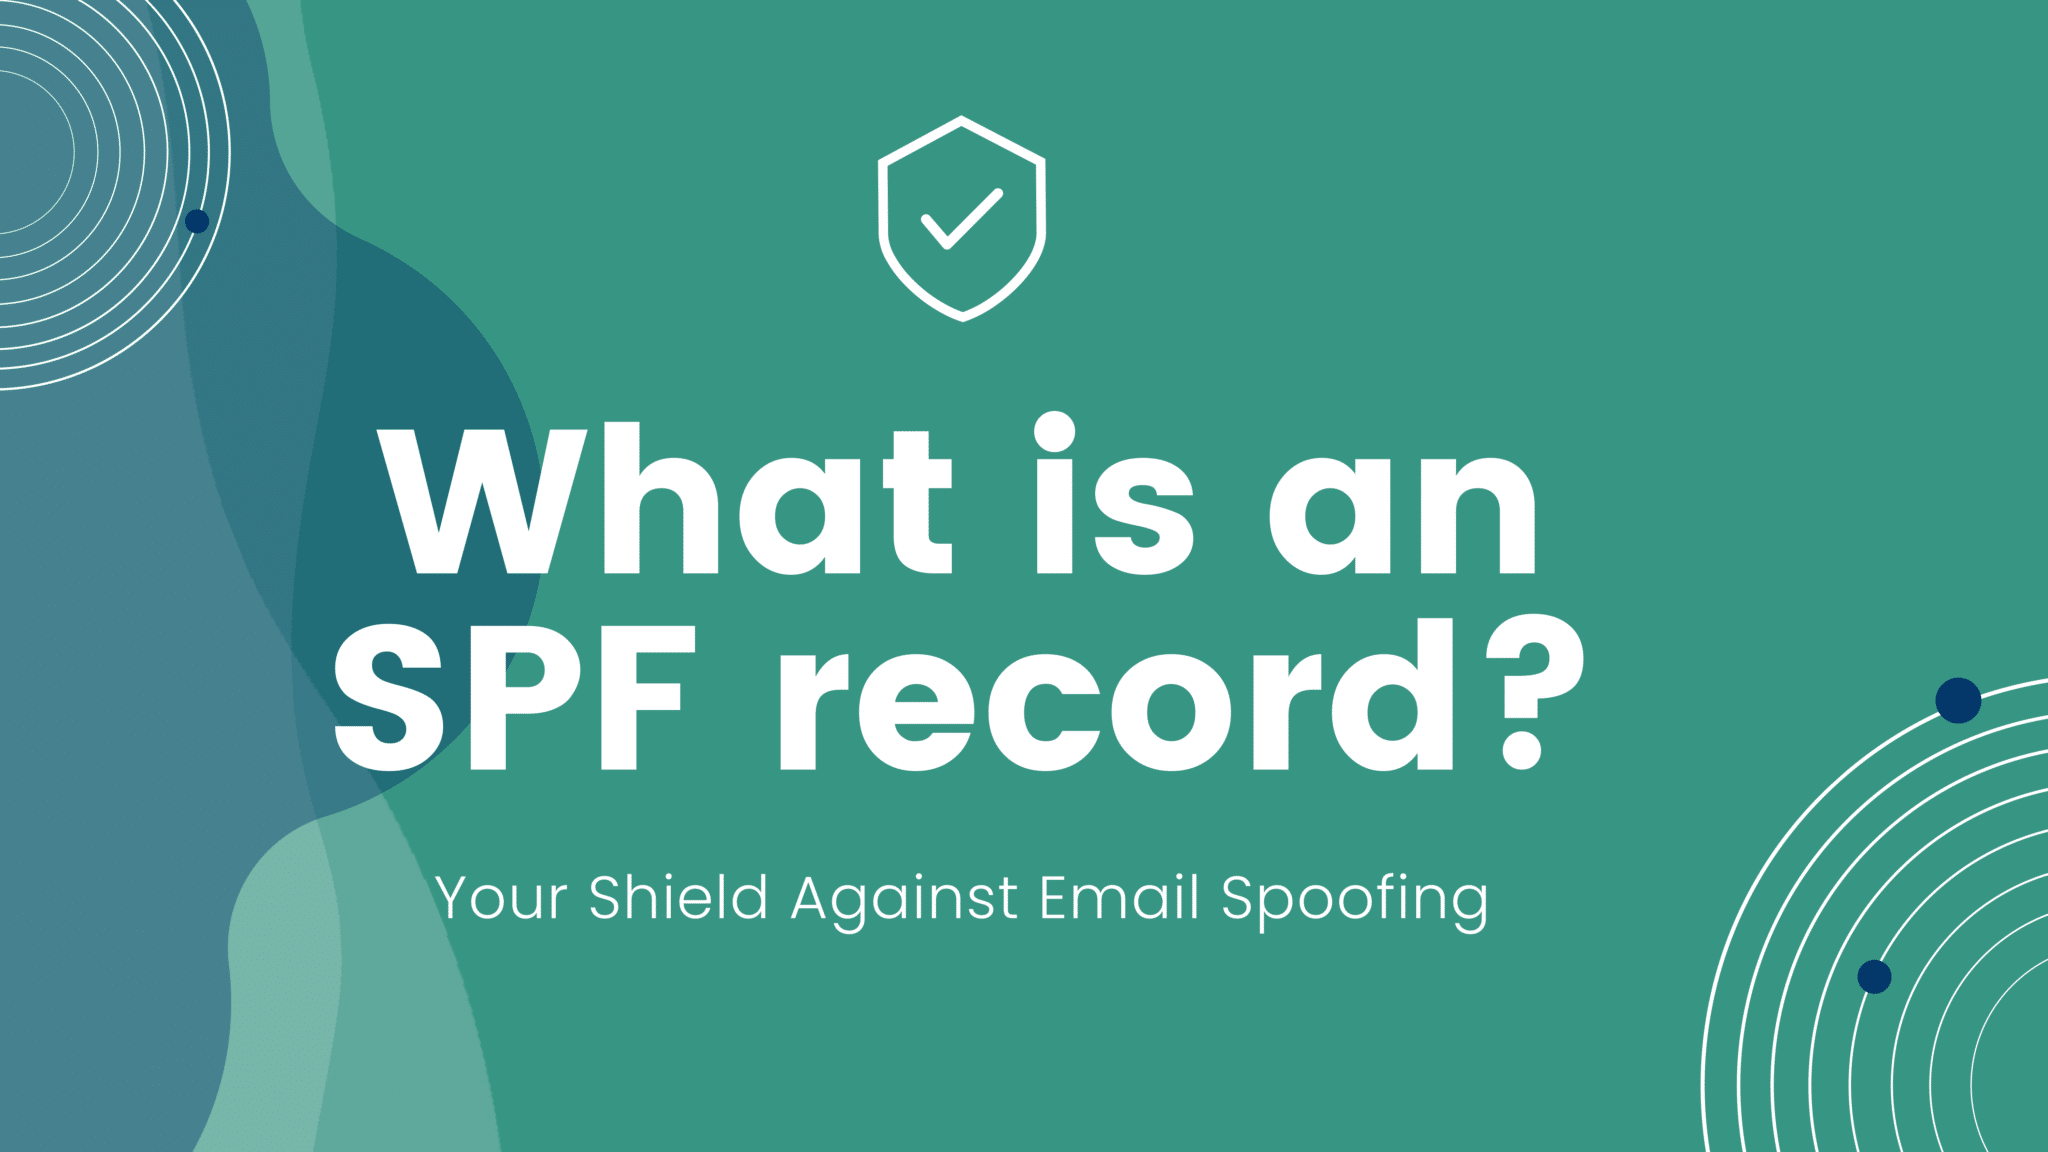 This image explains how an SPF record can be used to protect against email spoofing.